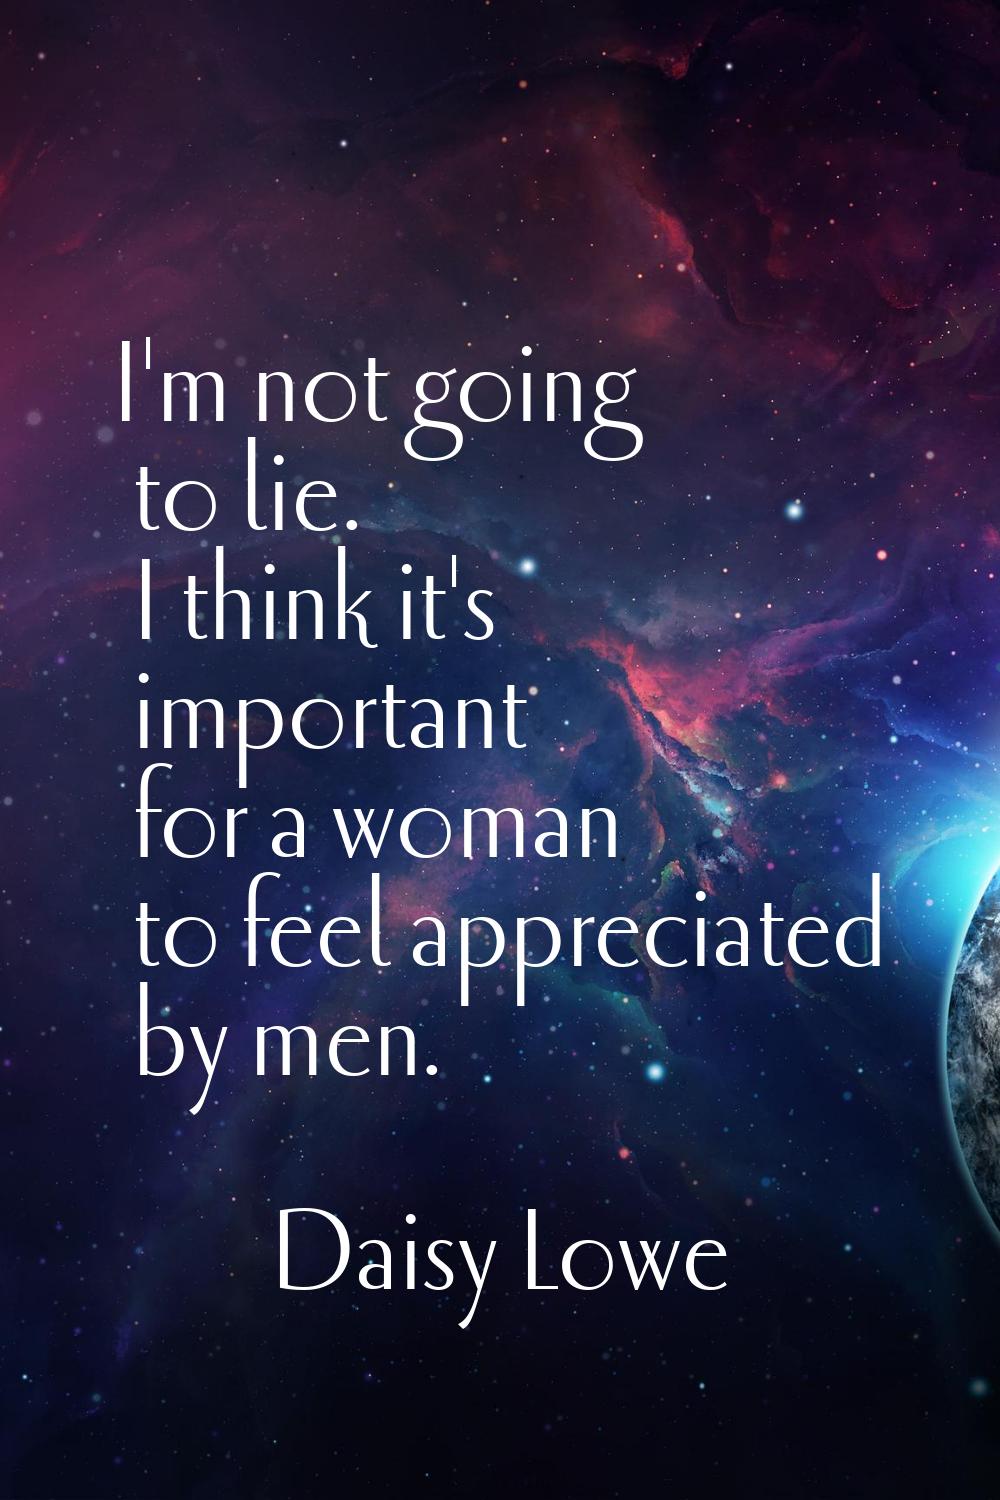 I'm not going to lie. I think it's important for a woman to feel appreciated by men.